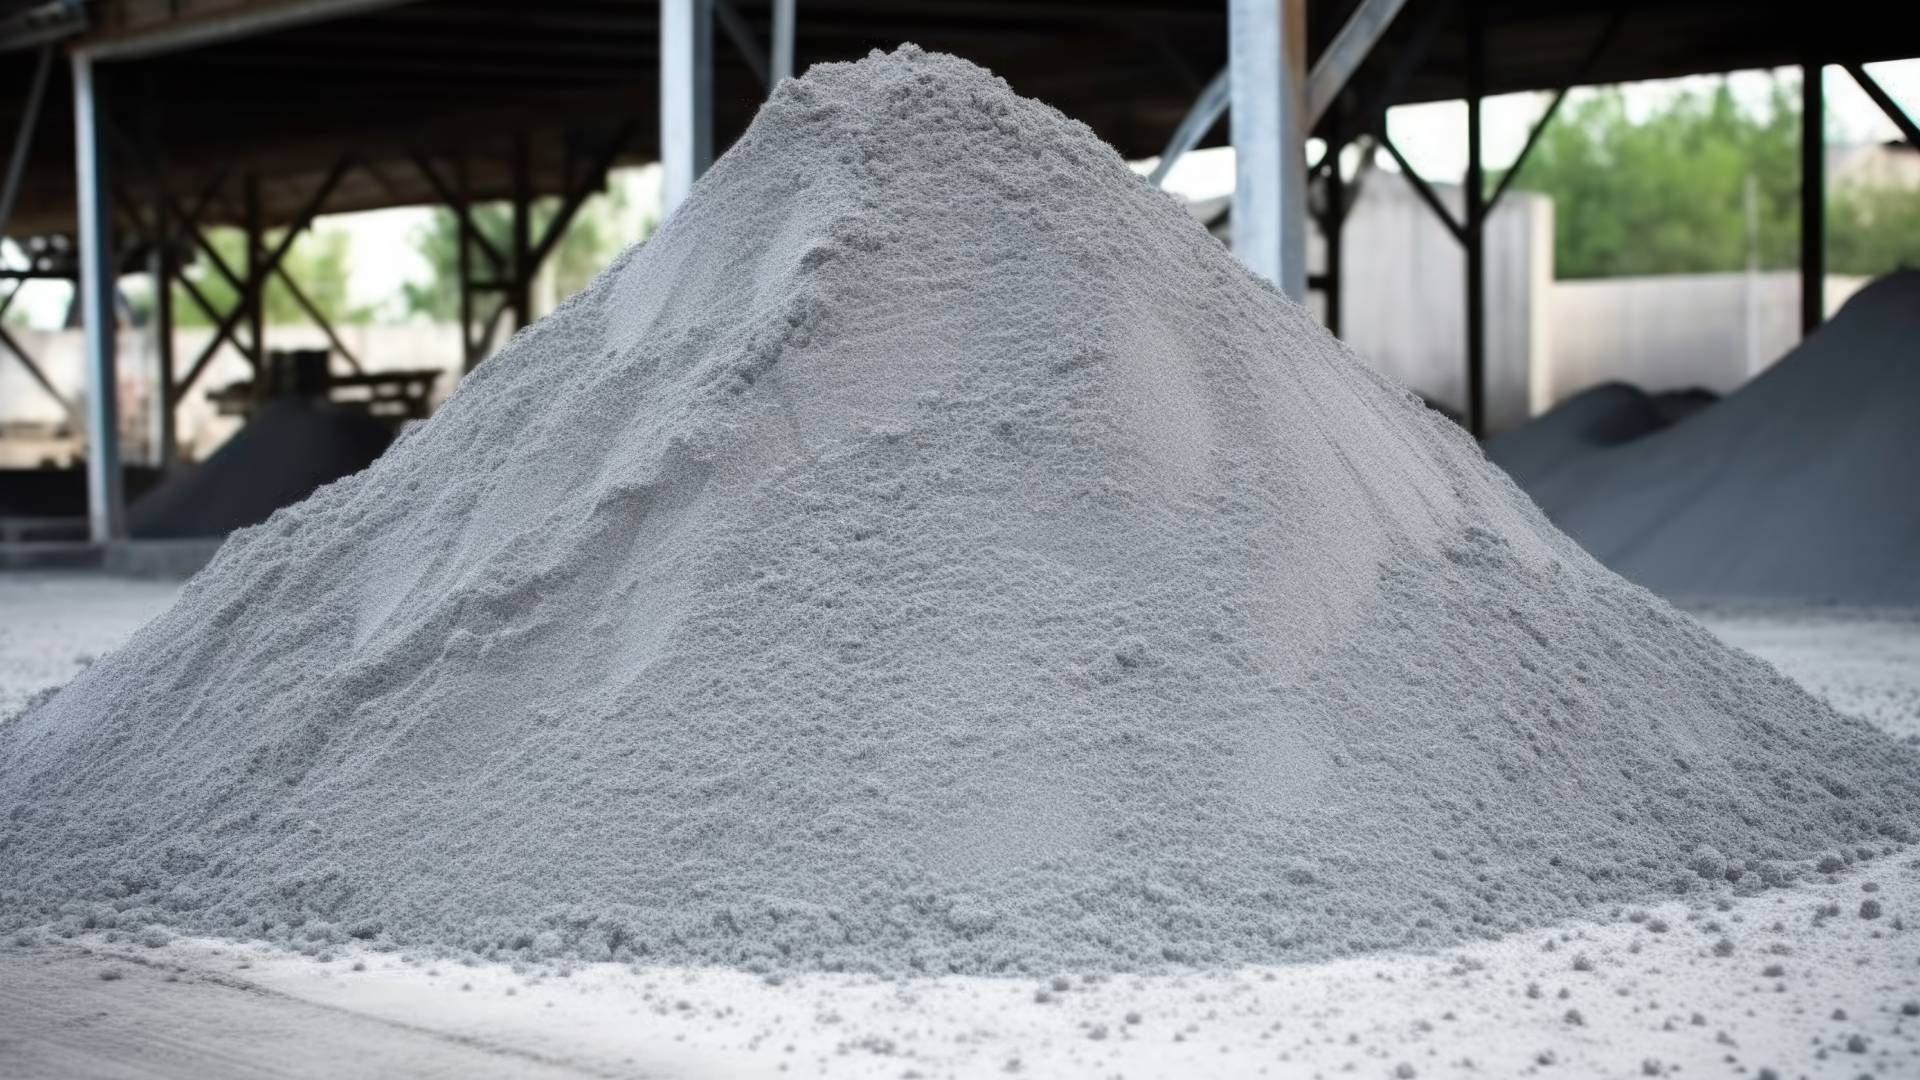 A pile of fly ash after being processed by a ball mill near Tollesboro, Kentucky (KY)